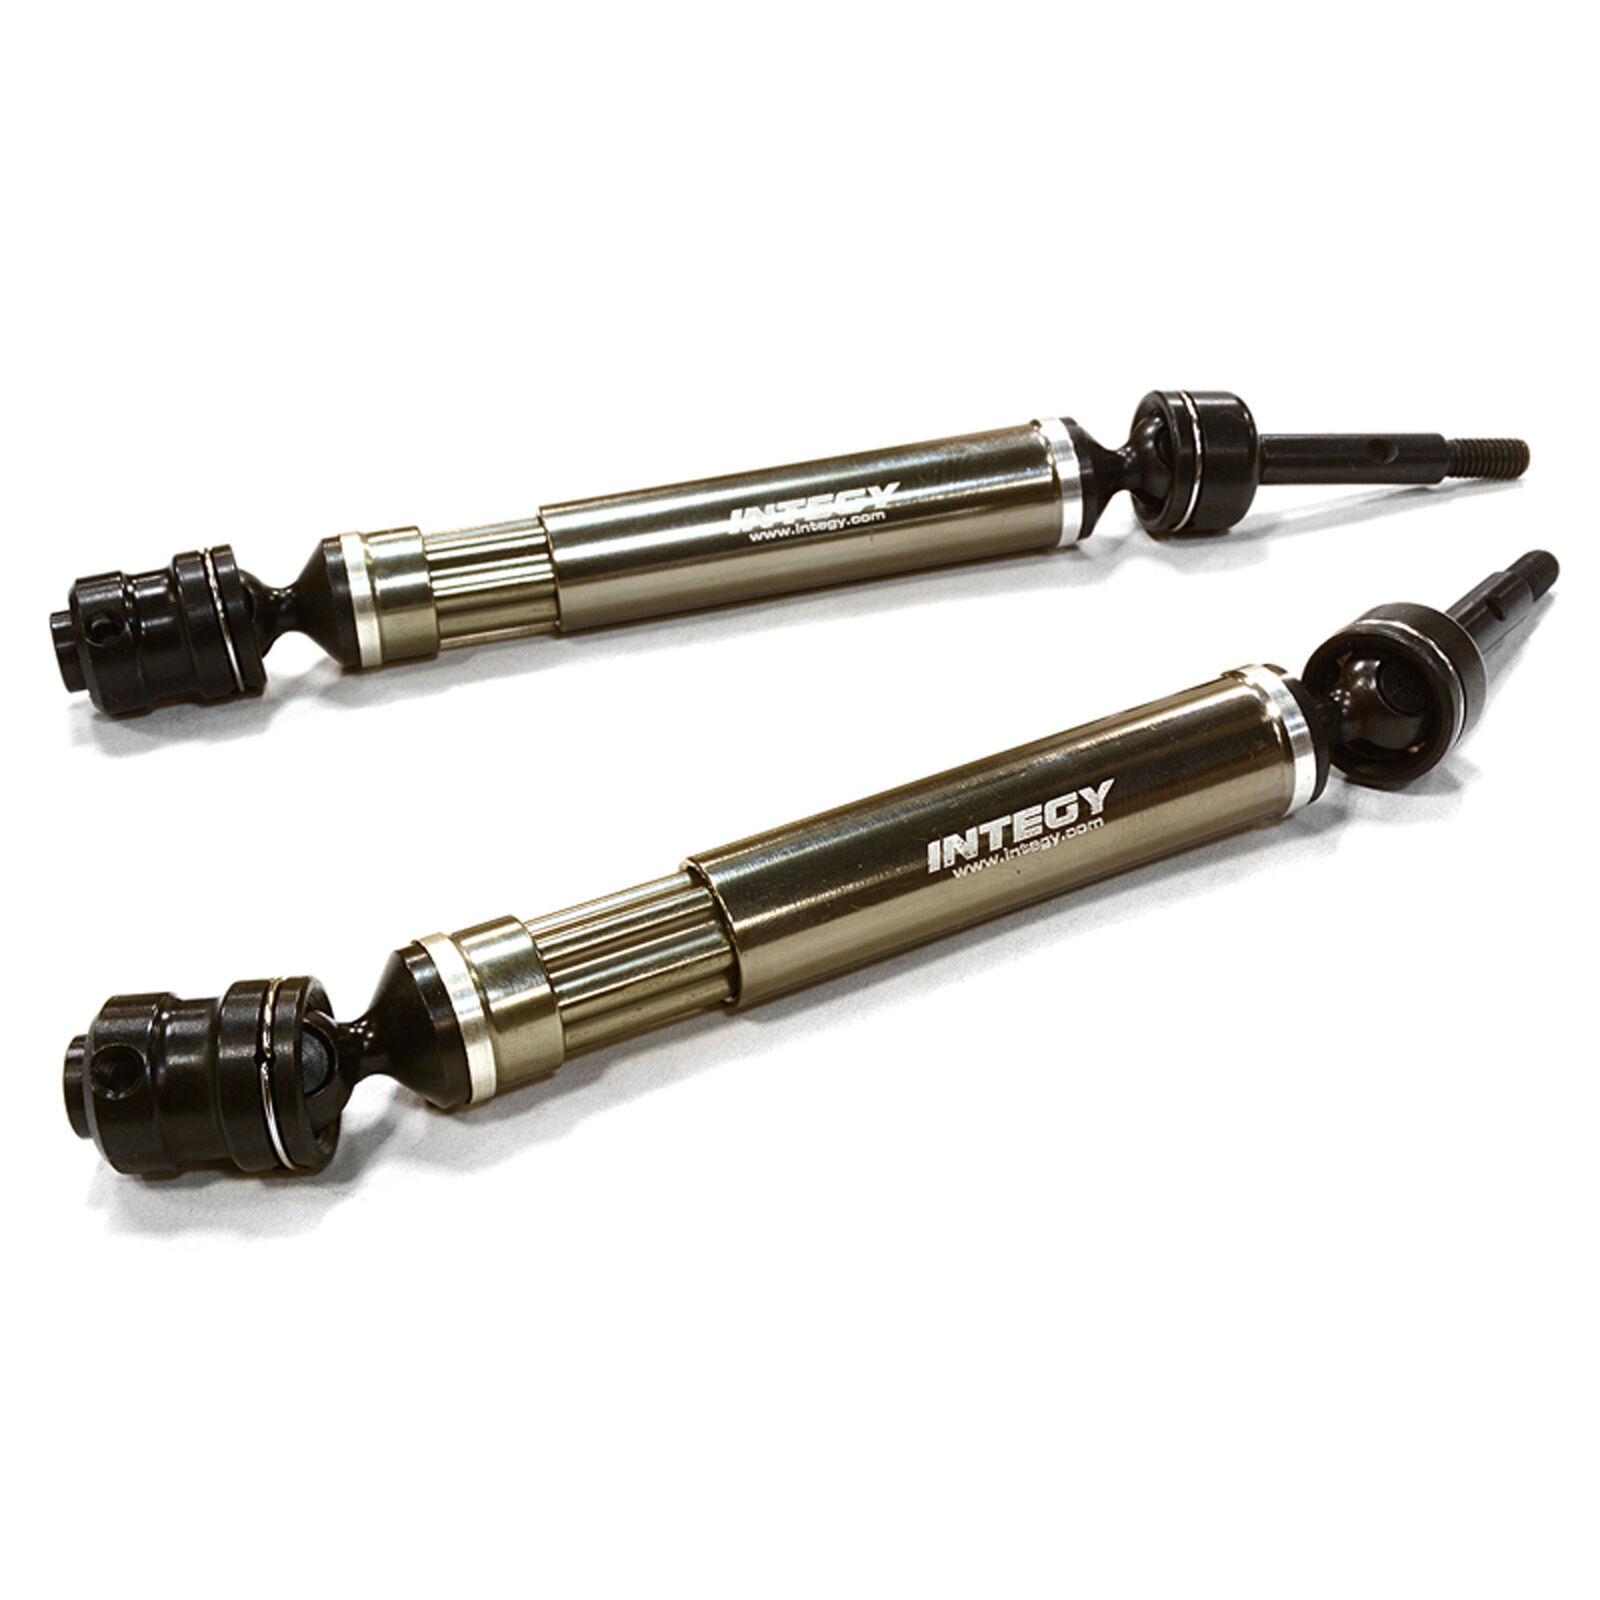 Dual Joint Telescopic Rear Driveshaft: Traxxas Stampede 2WD